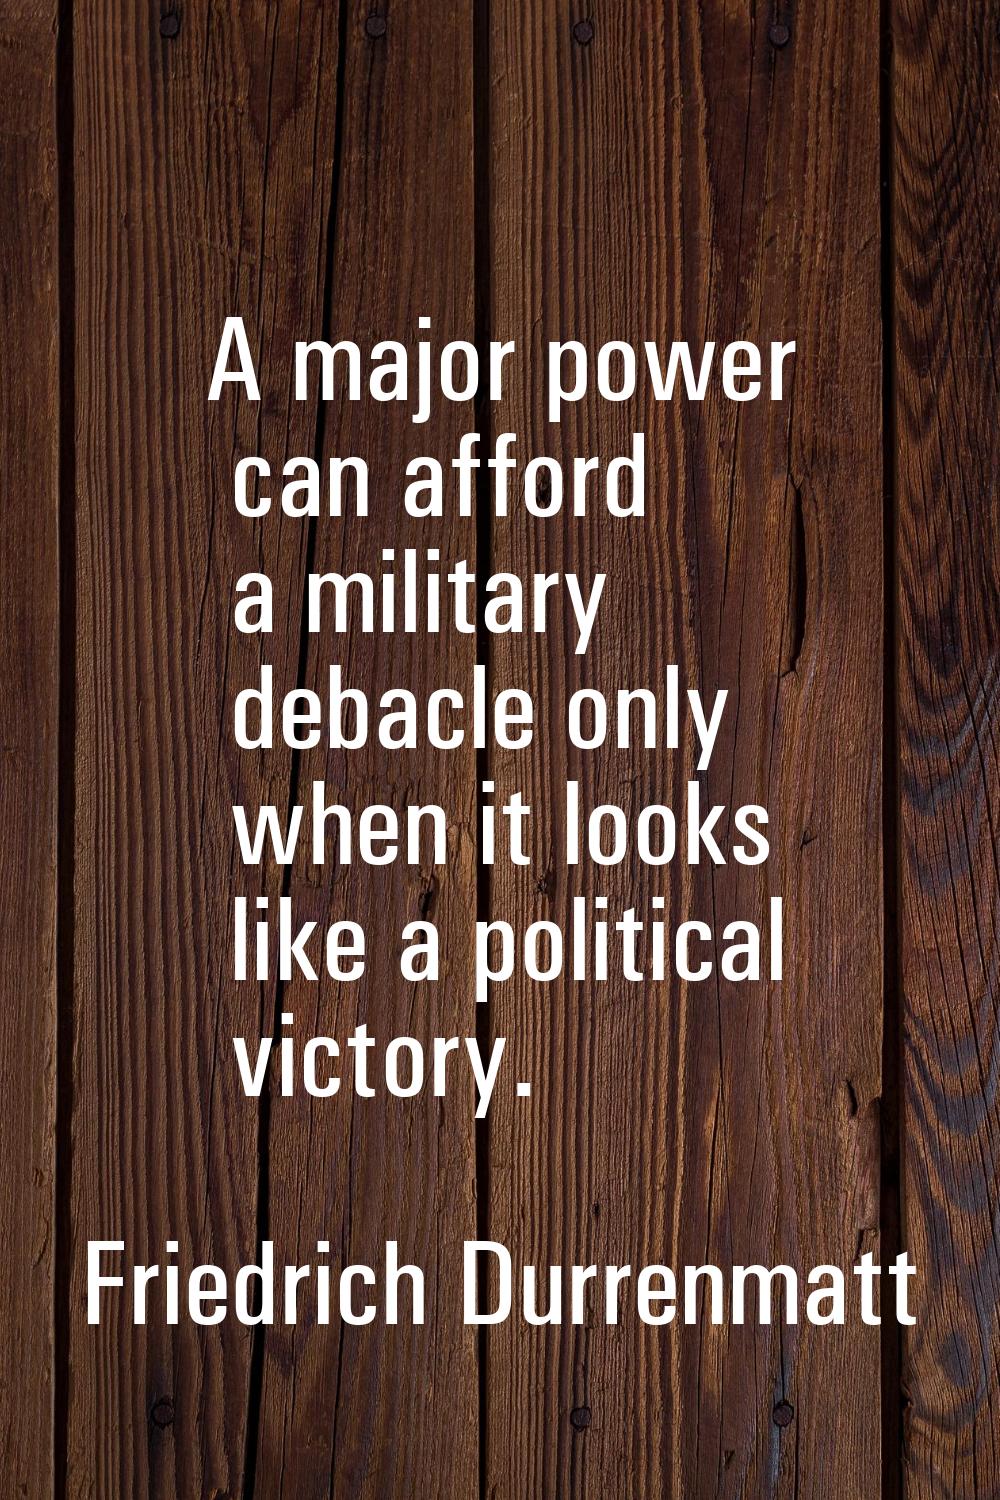 A major power can afford a military debacle only when it looks like a political victory.